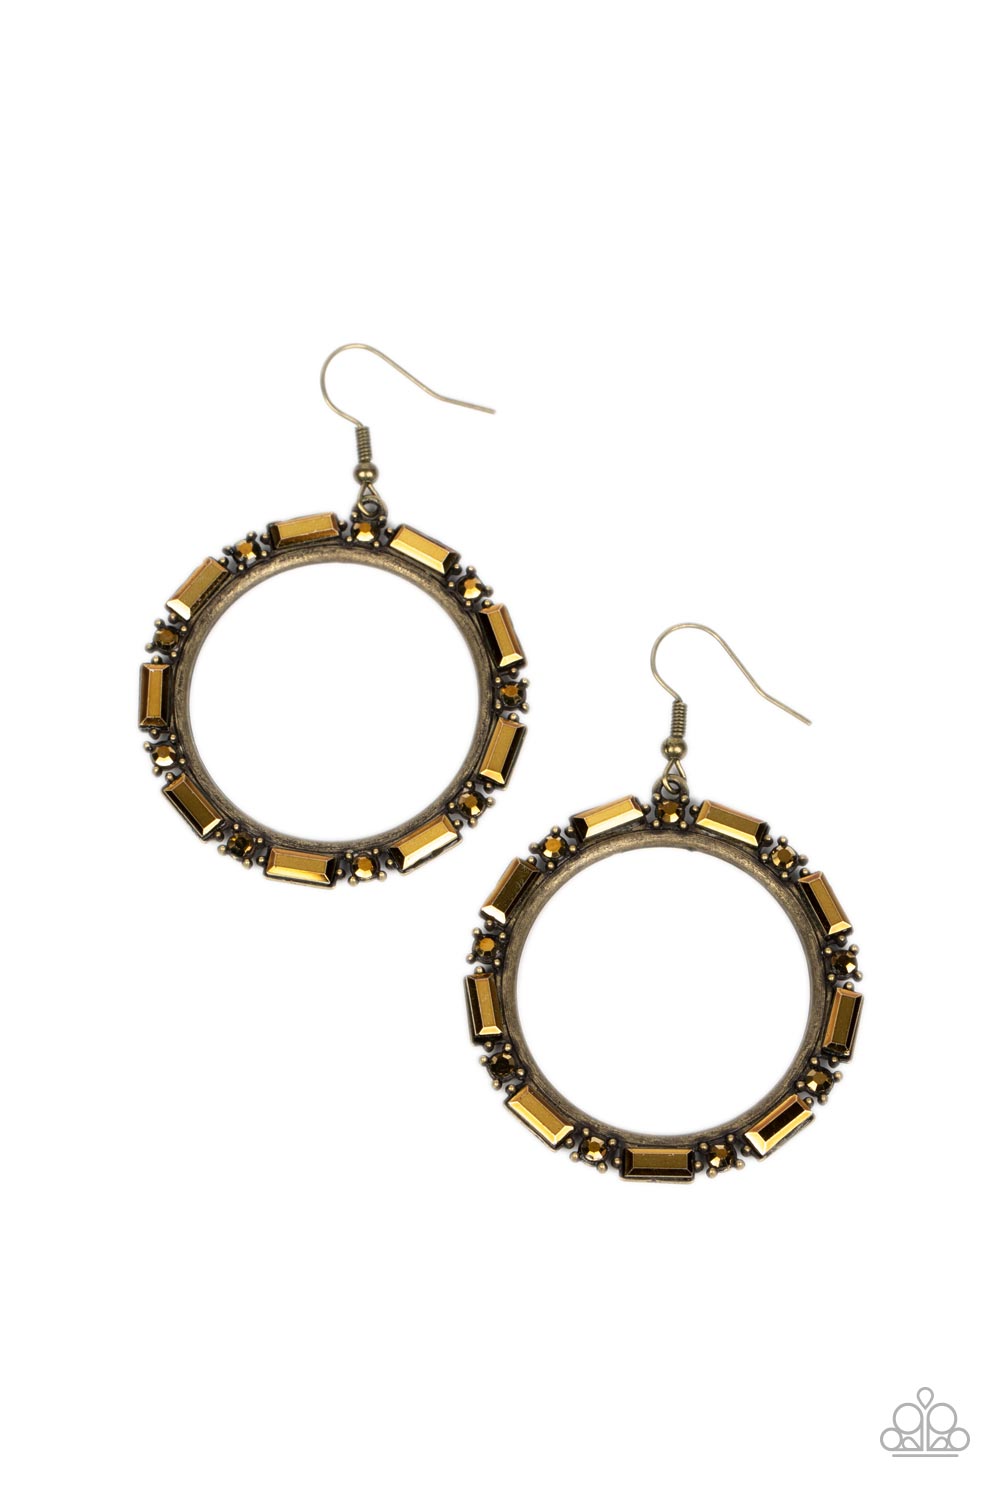 Paparazzi Accessories - Gritty Glow - Brass Earrings a gritty collection of round and emerald cut aurum rhinestones smolders along the outside rim of an antiqued brass hoop, resulting in an edgy centerpiece. Earring attaches to a standard fishhook fitting.  Sold as one pair of earrings.